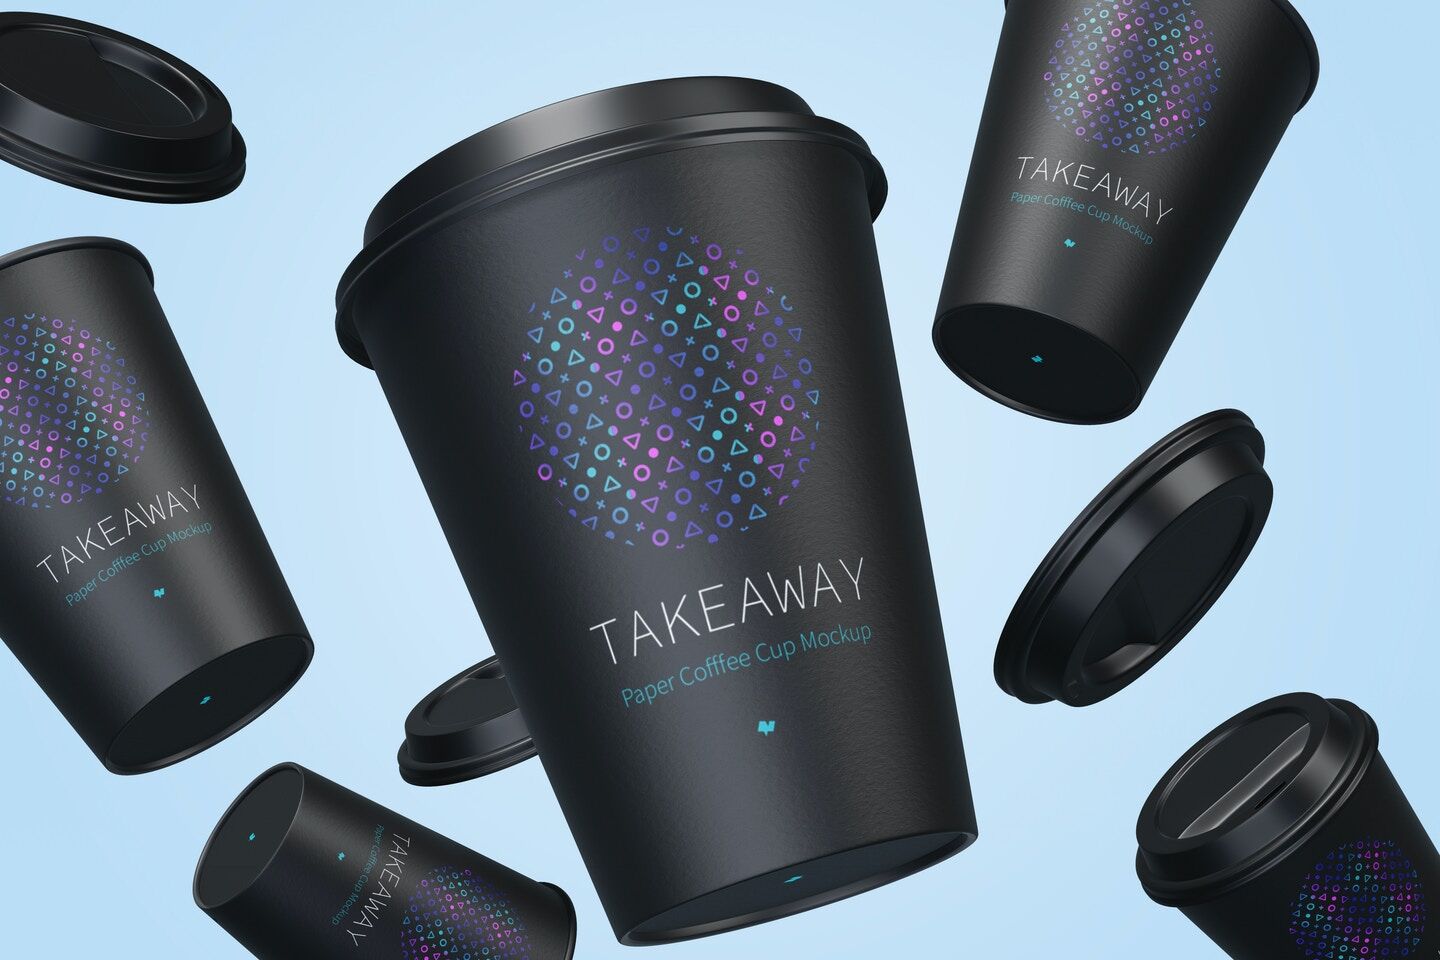 Paper Coffee Cups with Caps Mockup Floating in the Air FREE PSD